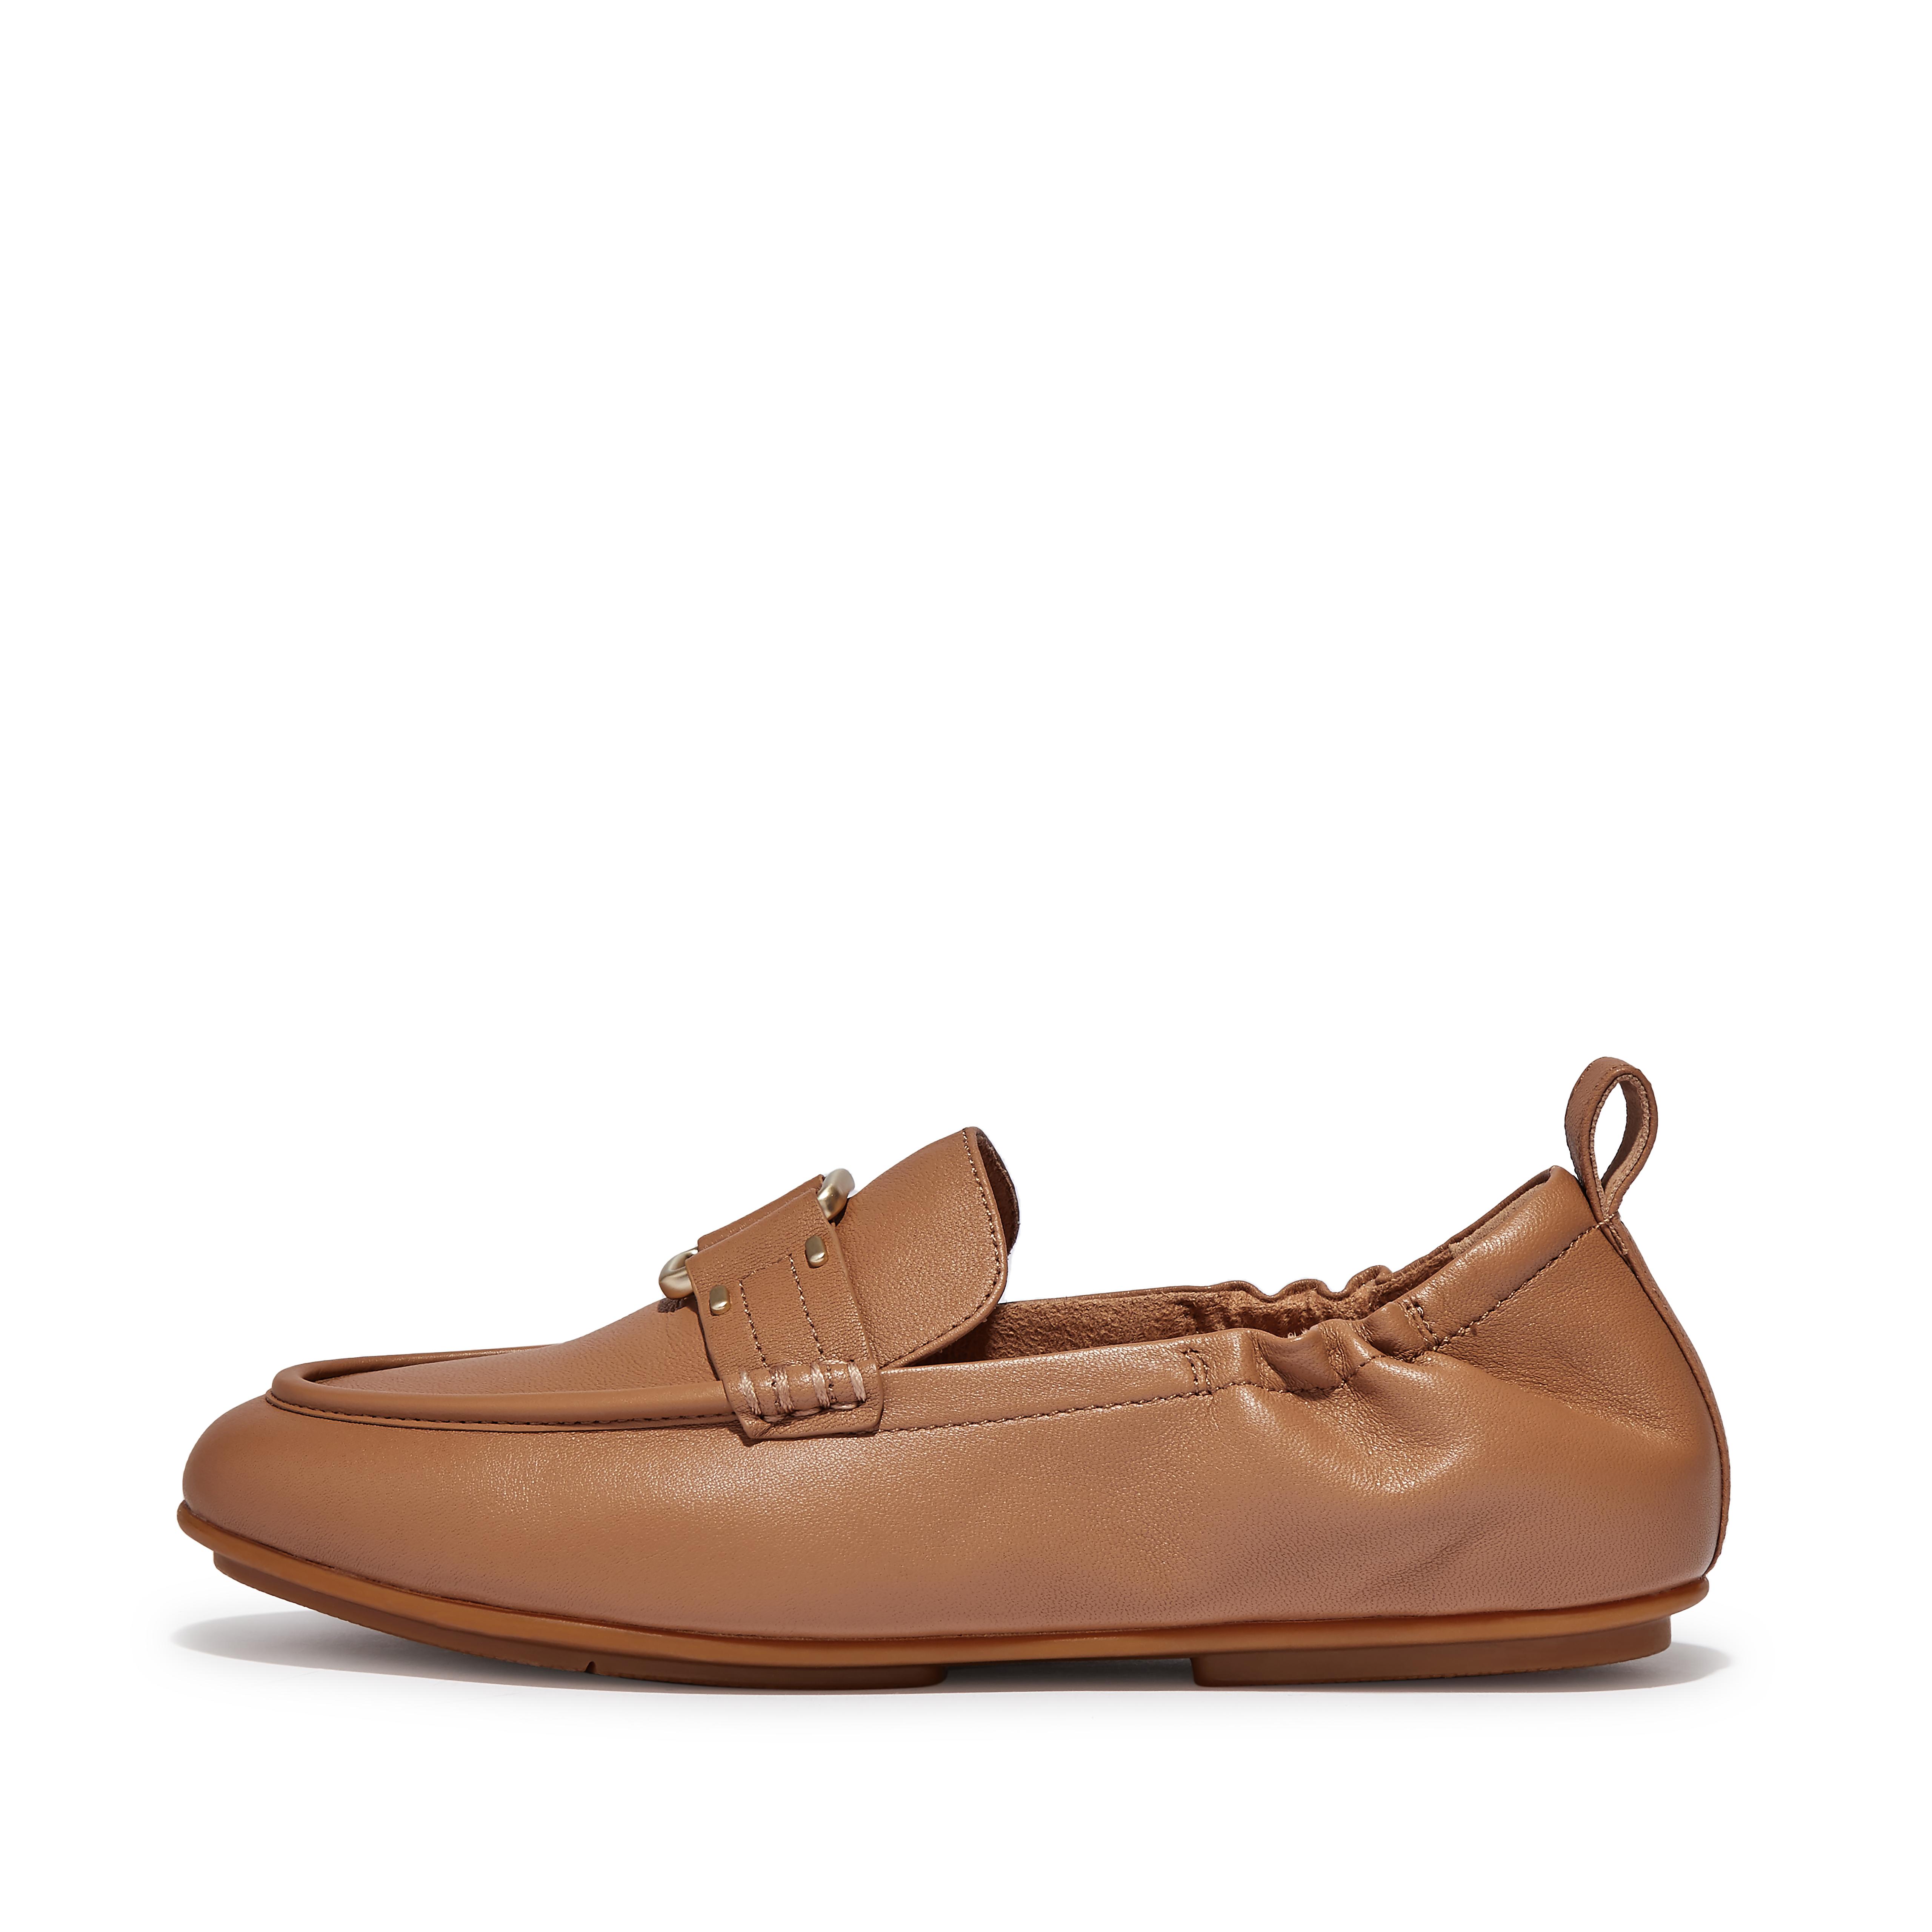 Fitflop Stud-Buckle Leather Loafers